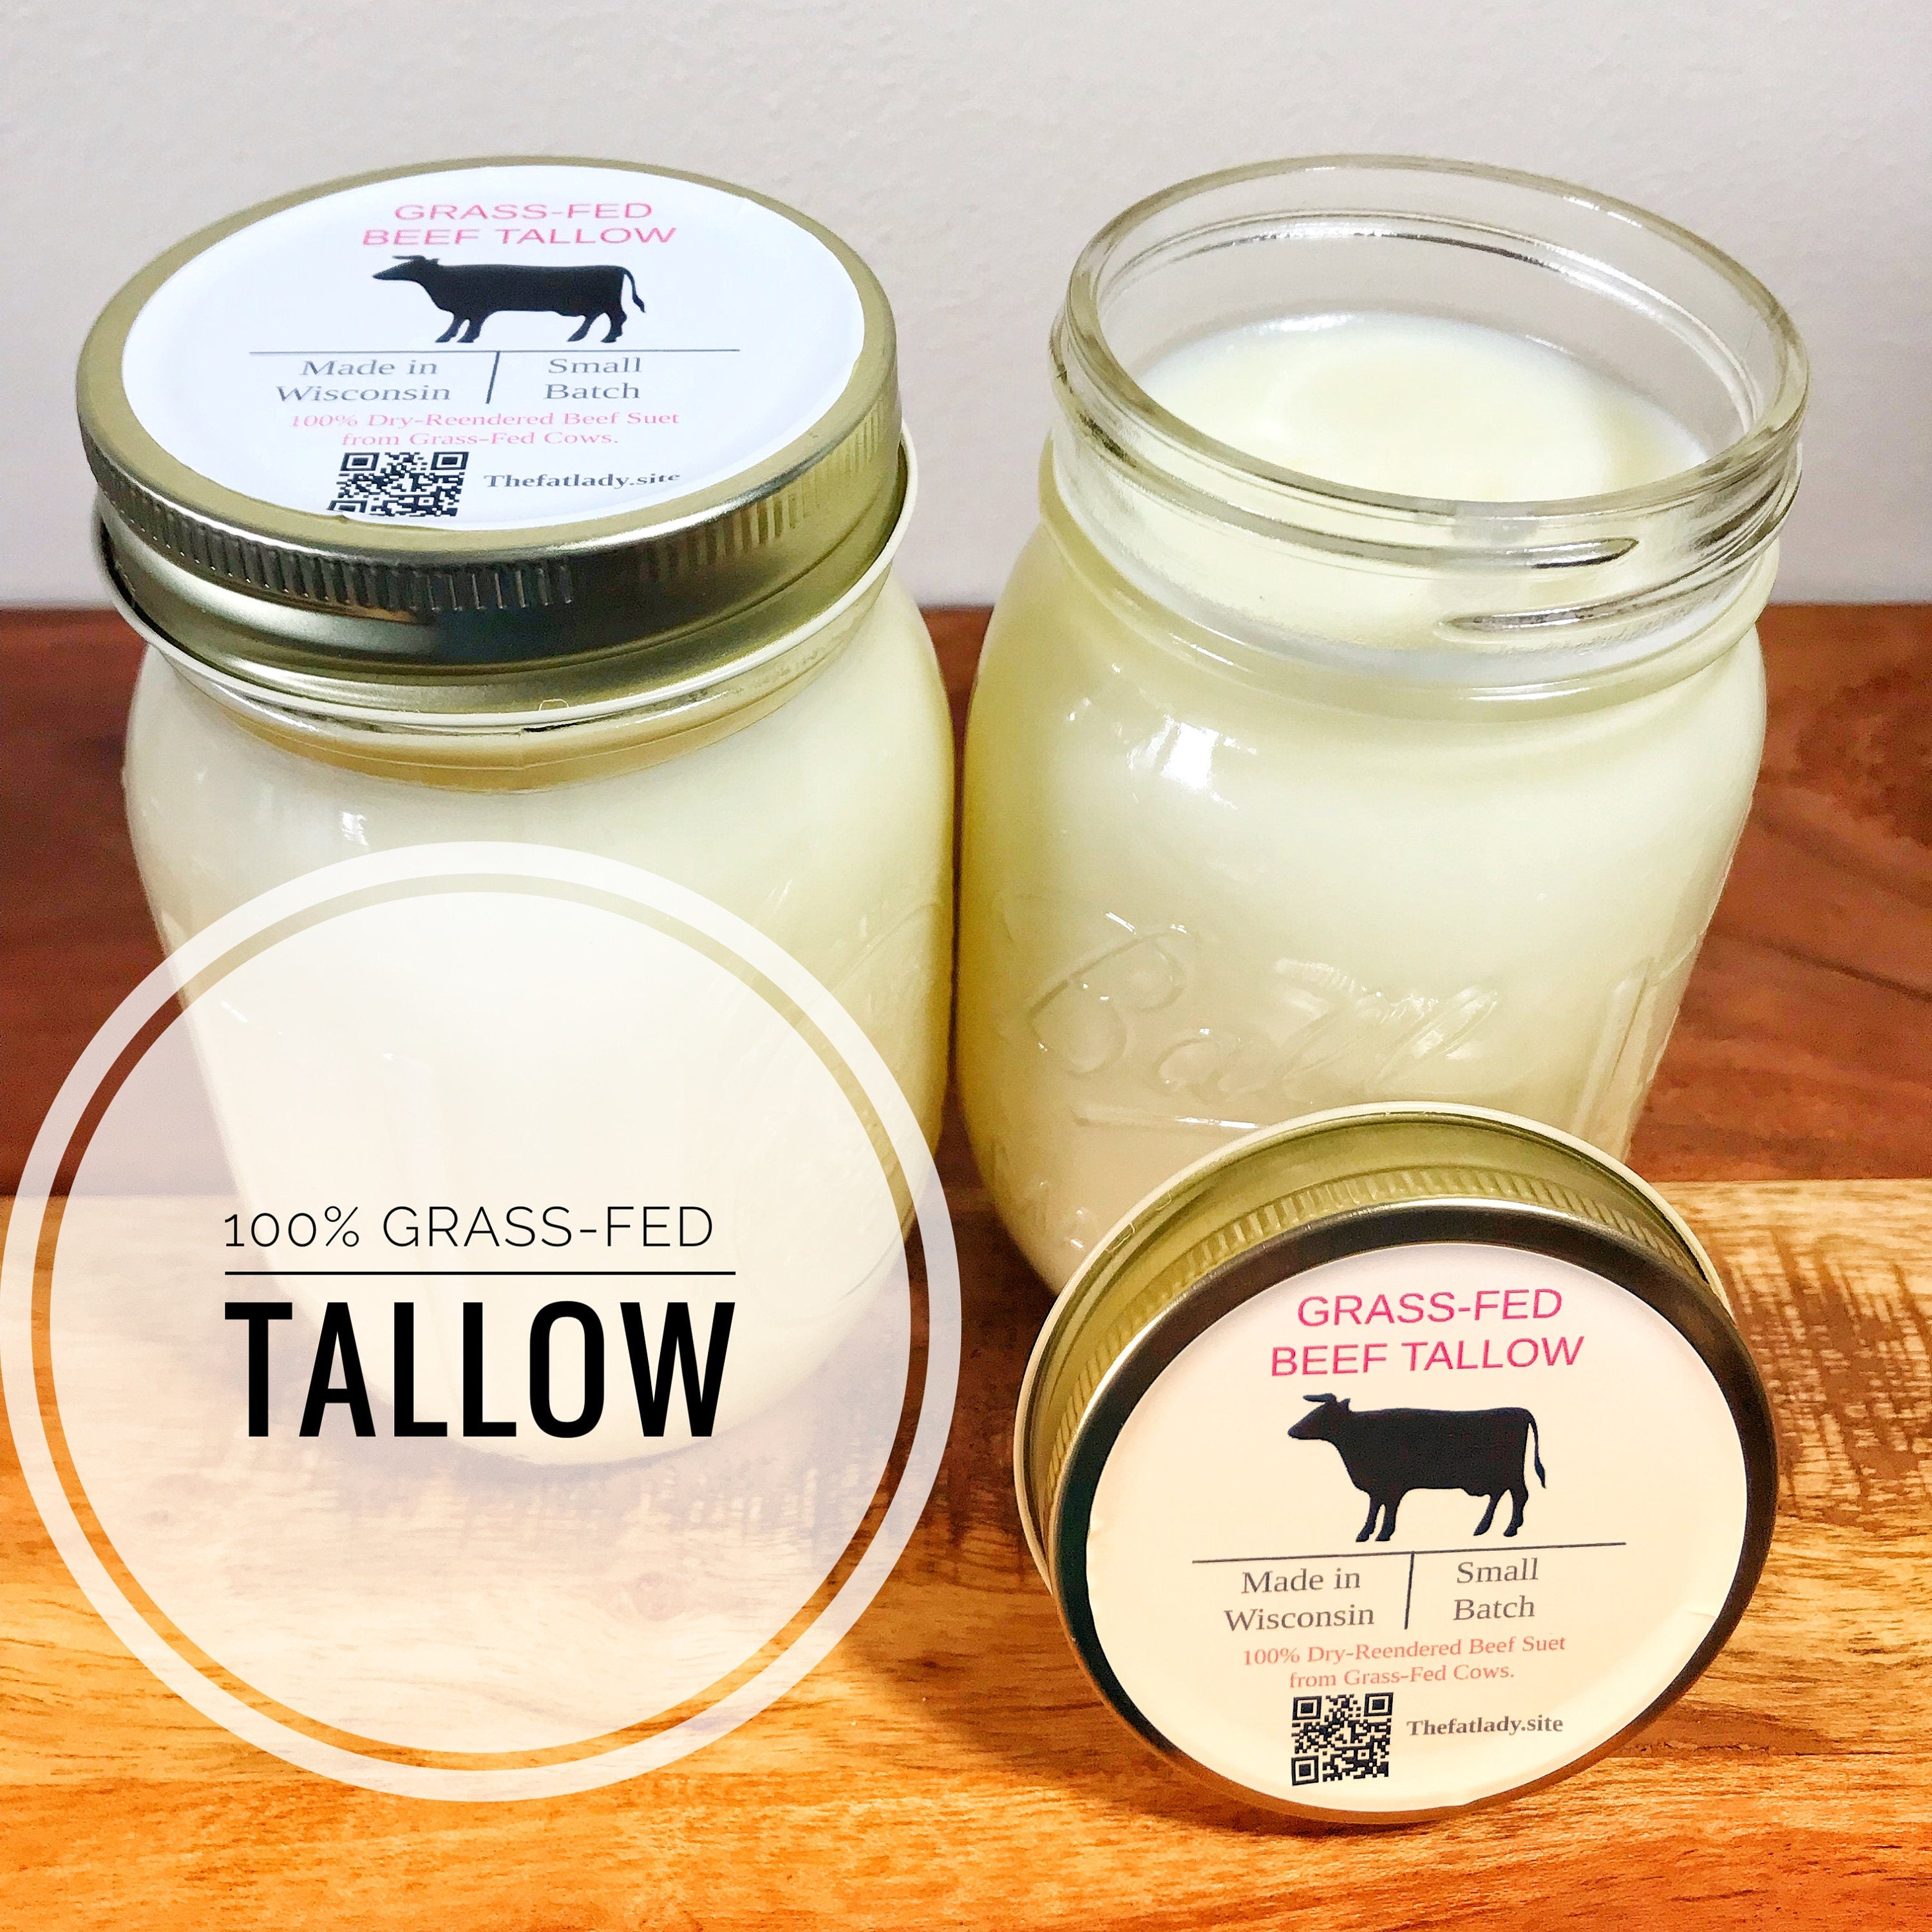 100% Highest Quality Grass-Fed Beef Tallow from Wisconsin| Reusable Glass Jar| Double Rendered and Filtered Maximum Purity and Stability.